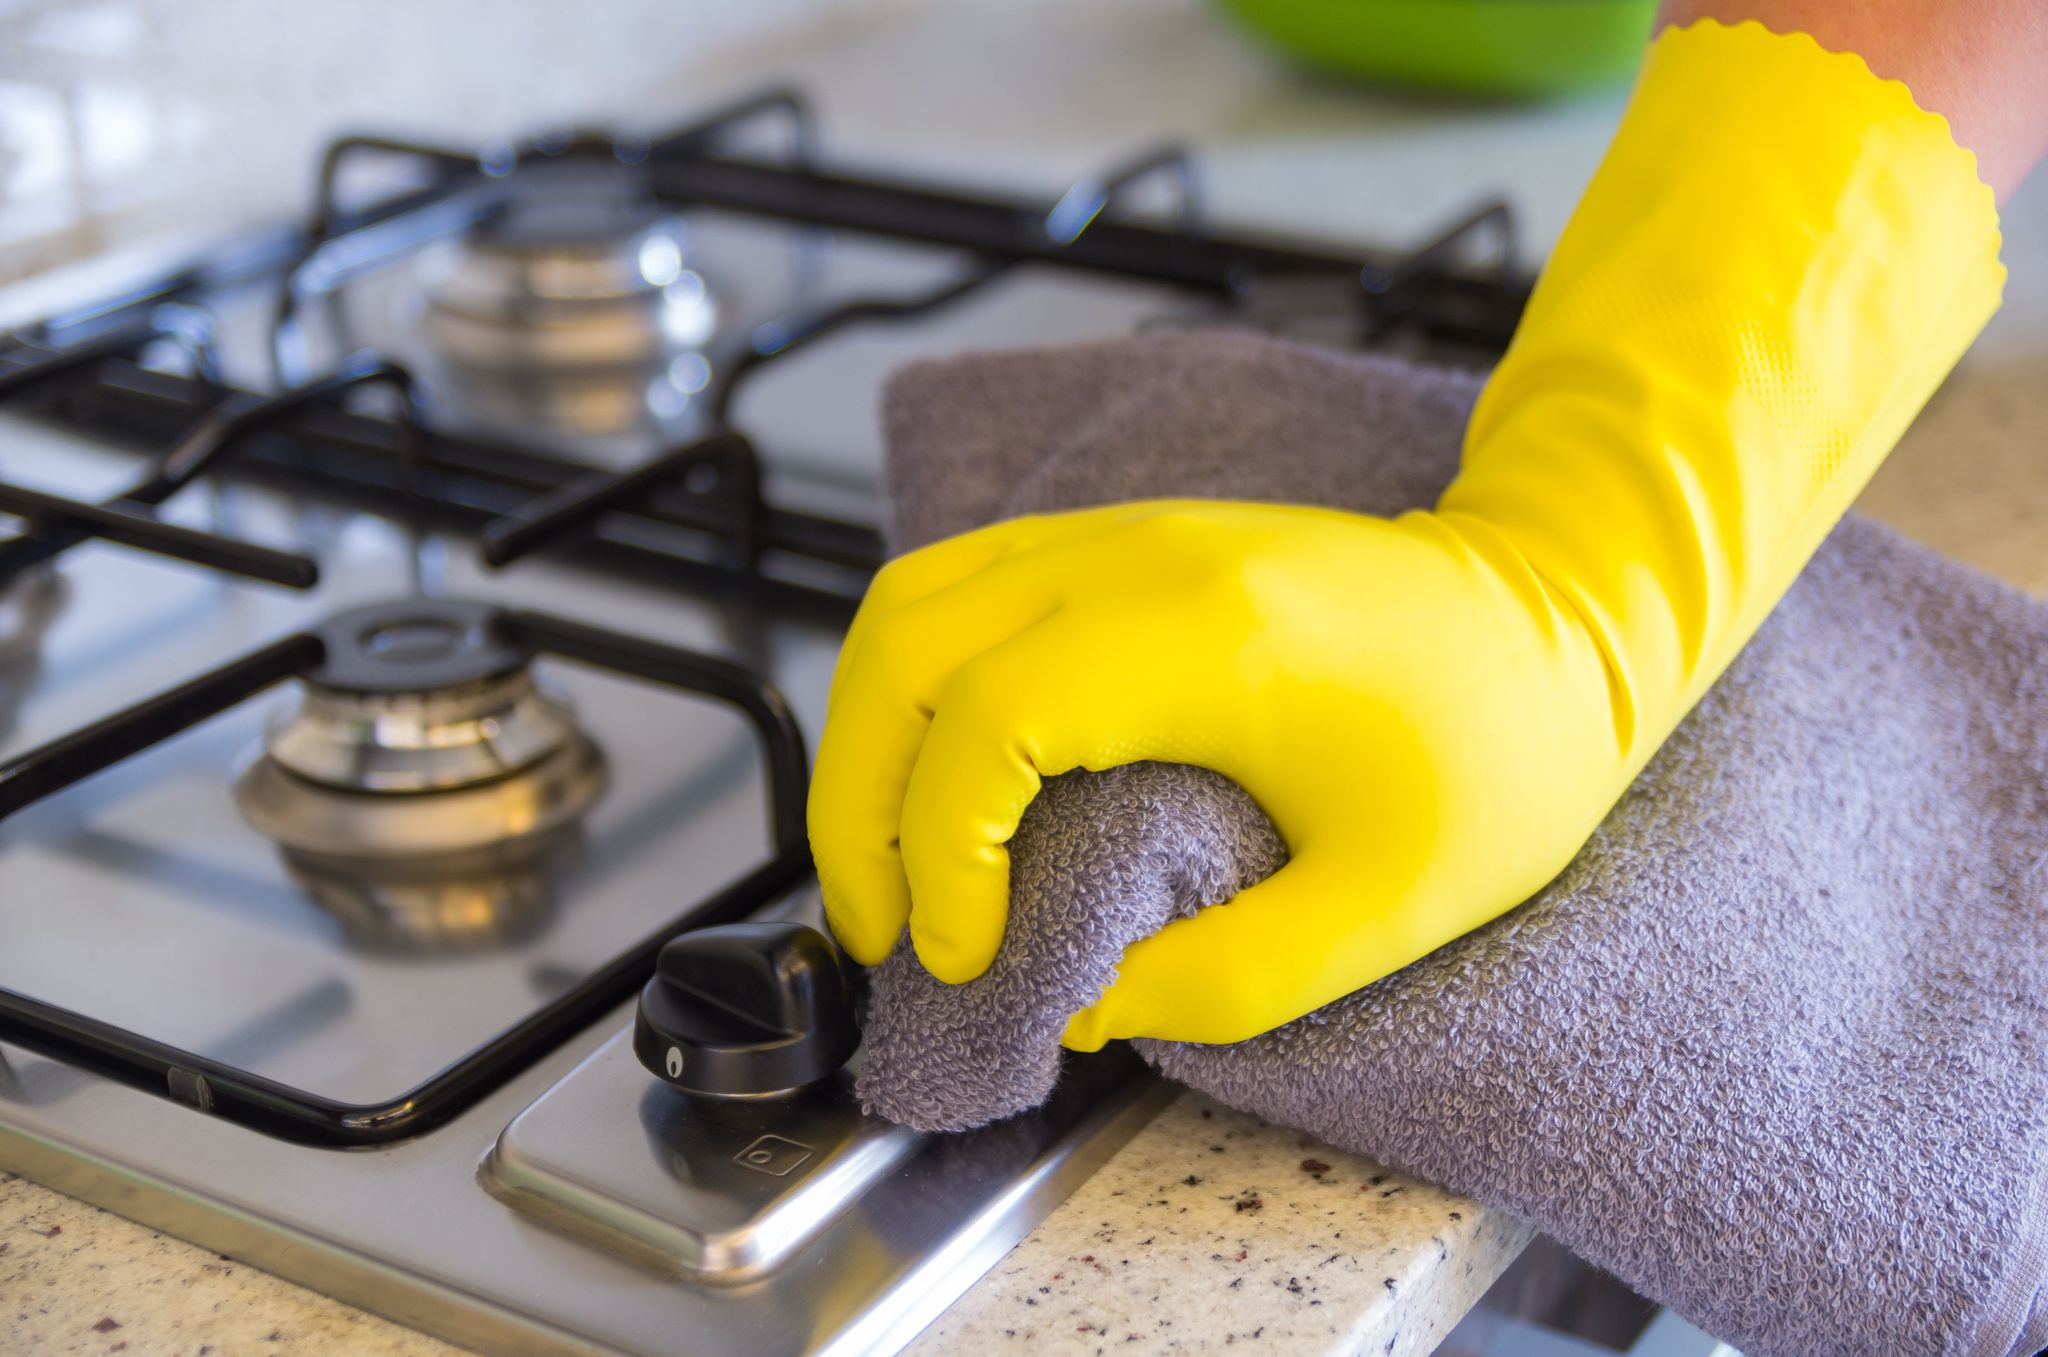 Ranking of the best metal cleaners for 2022